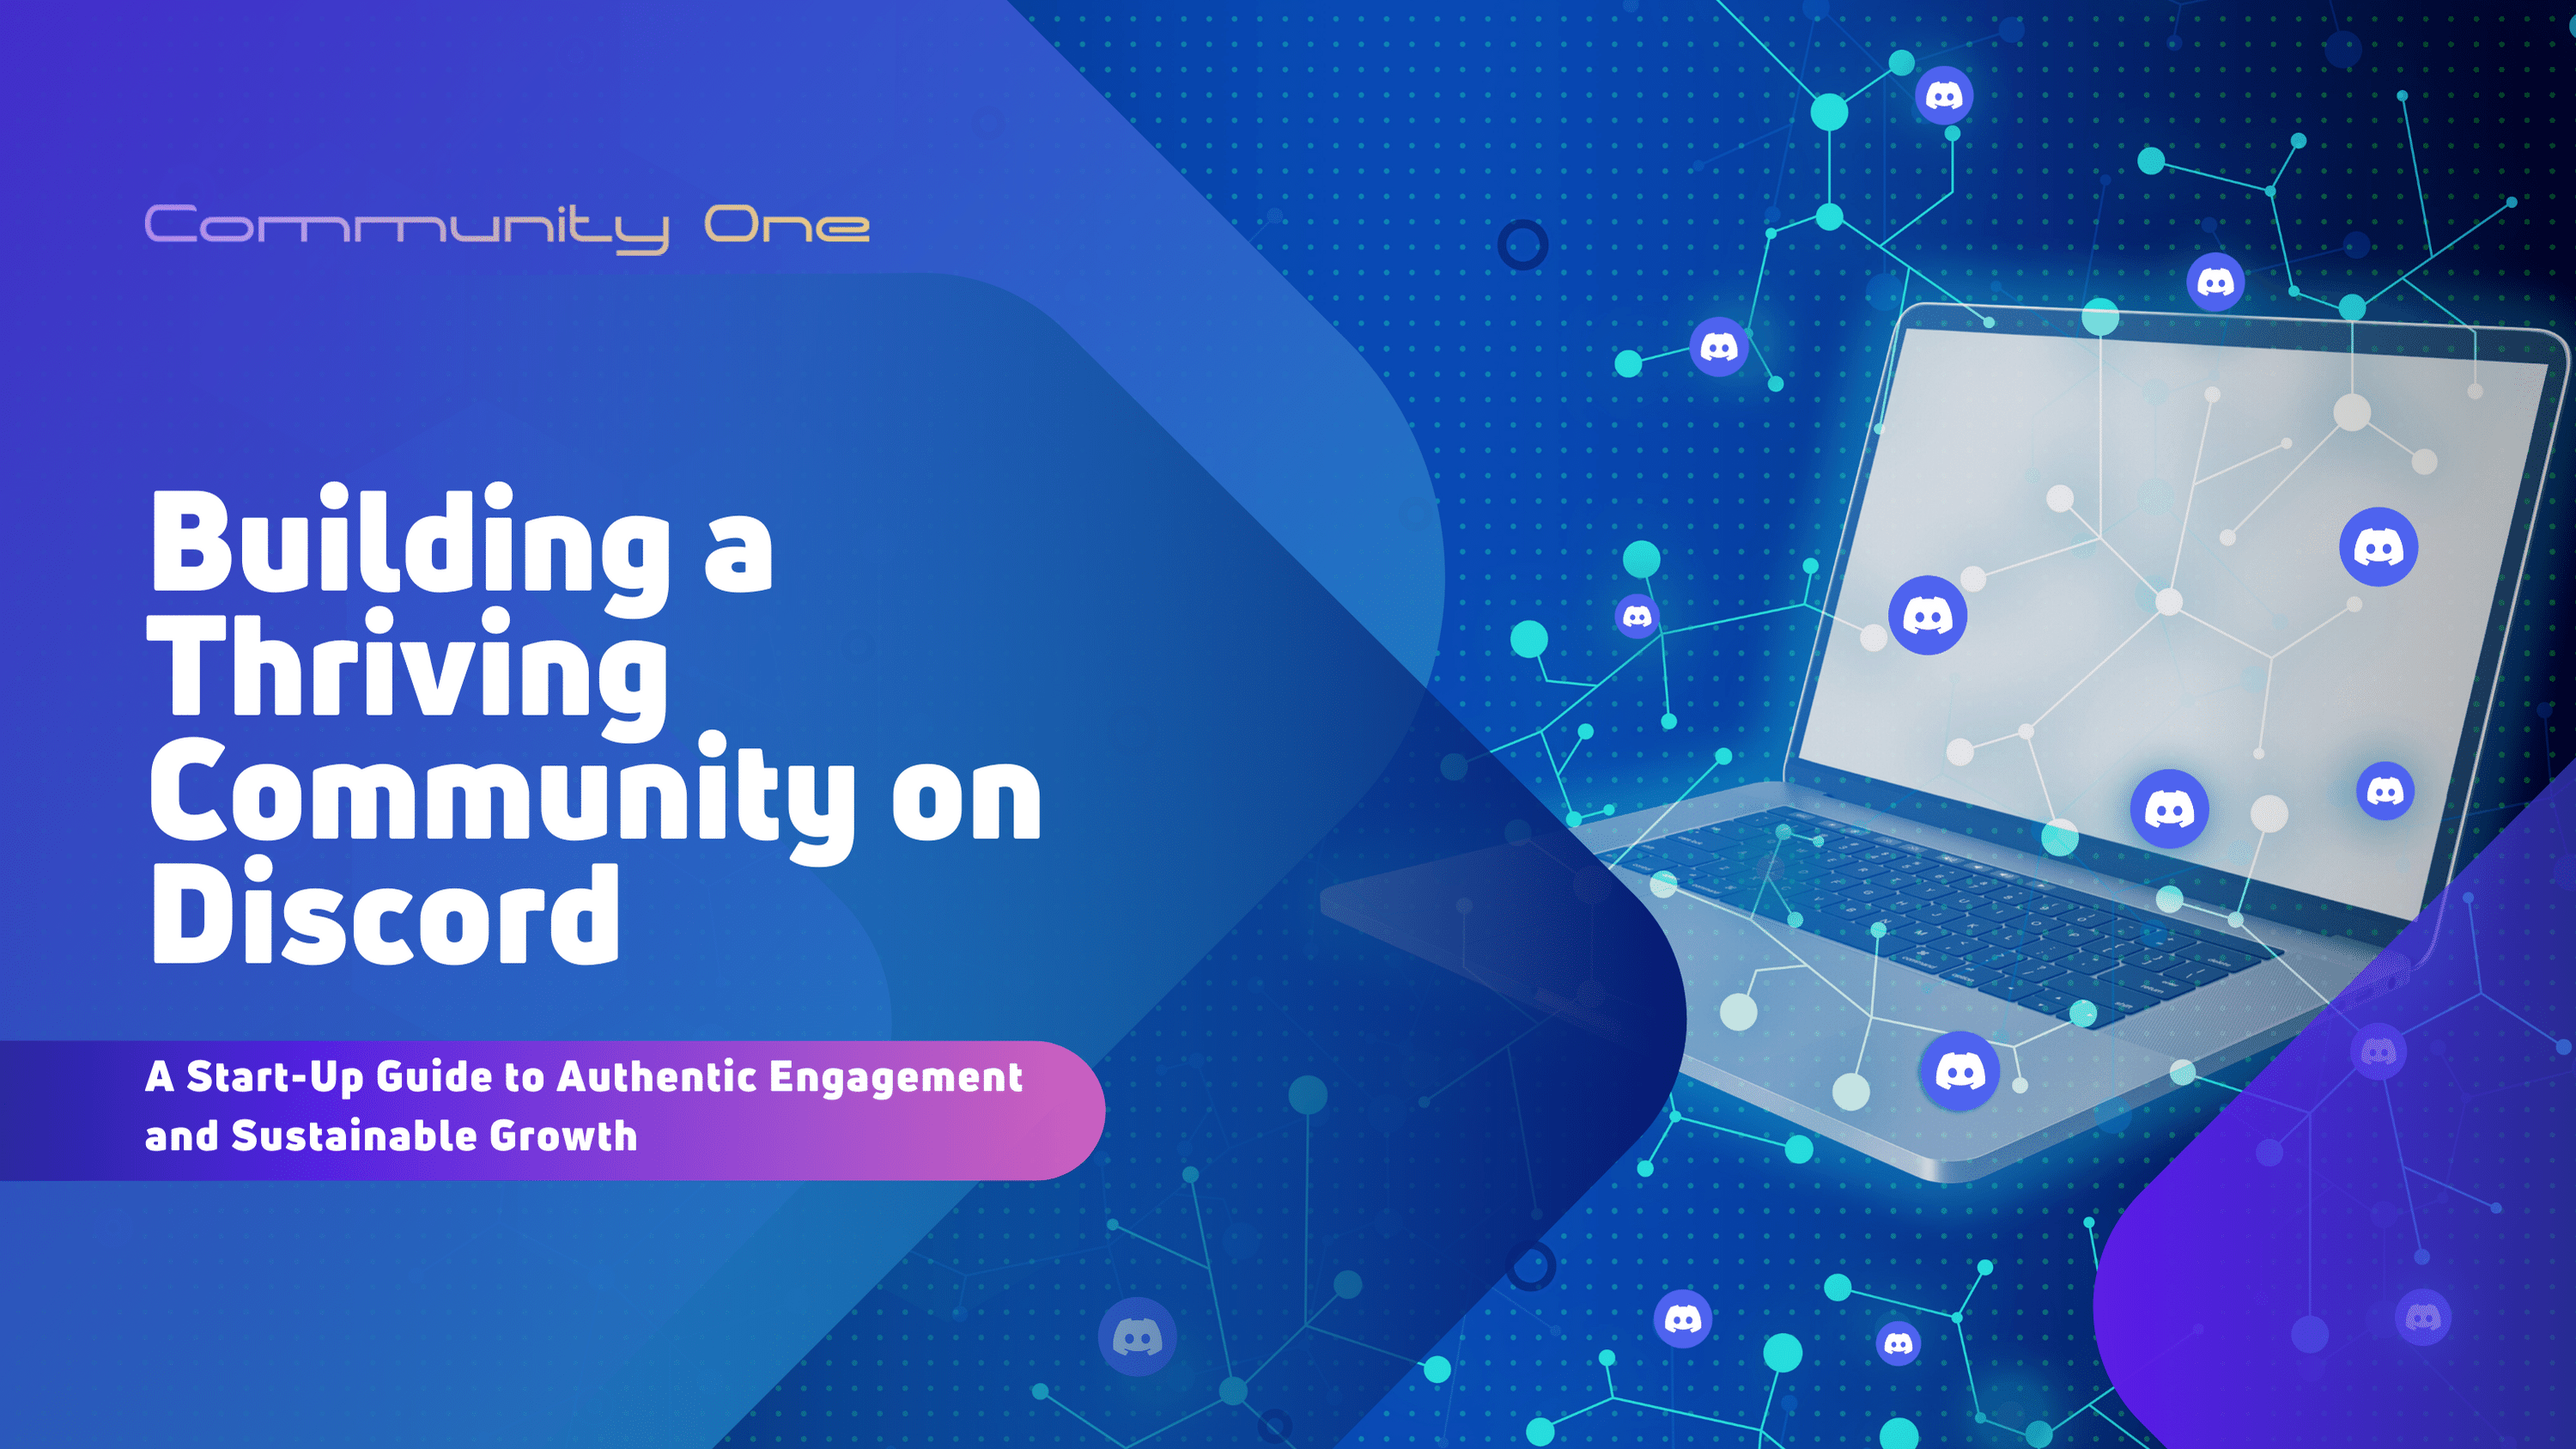 Building a Thriving Community on Discord: A Start-Up Guide to Authentic Engagement and Sustainable Growth